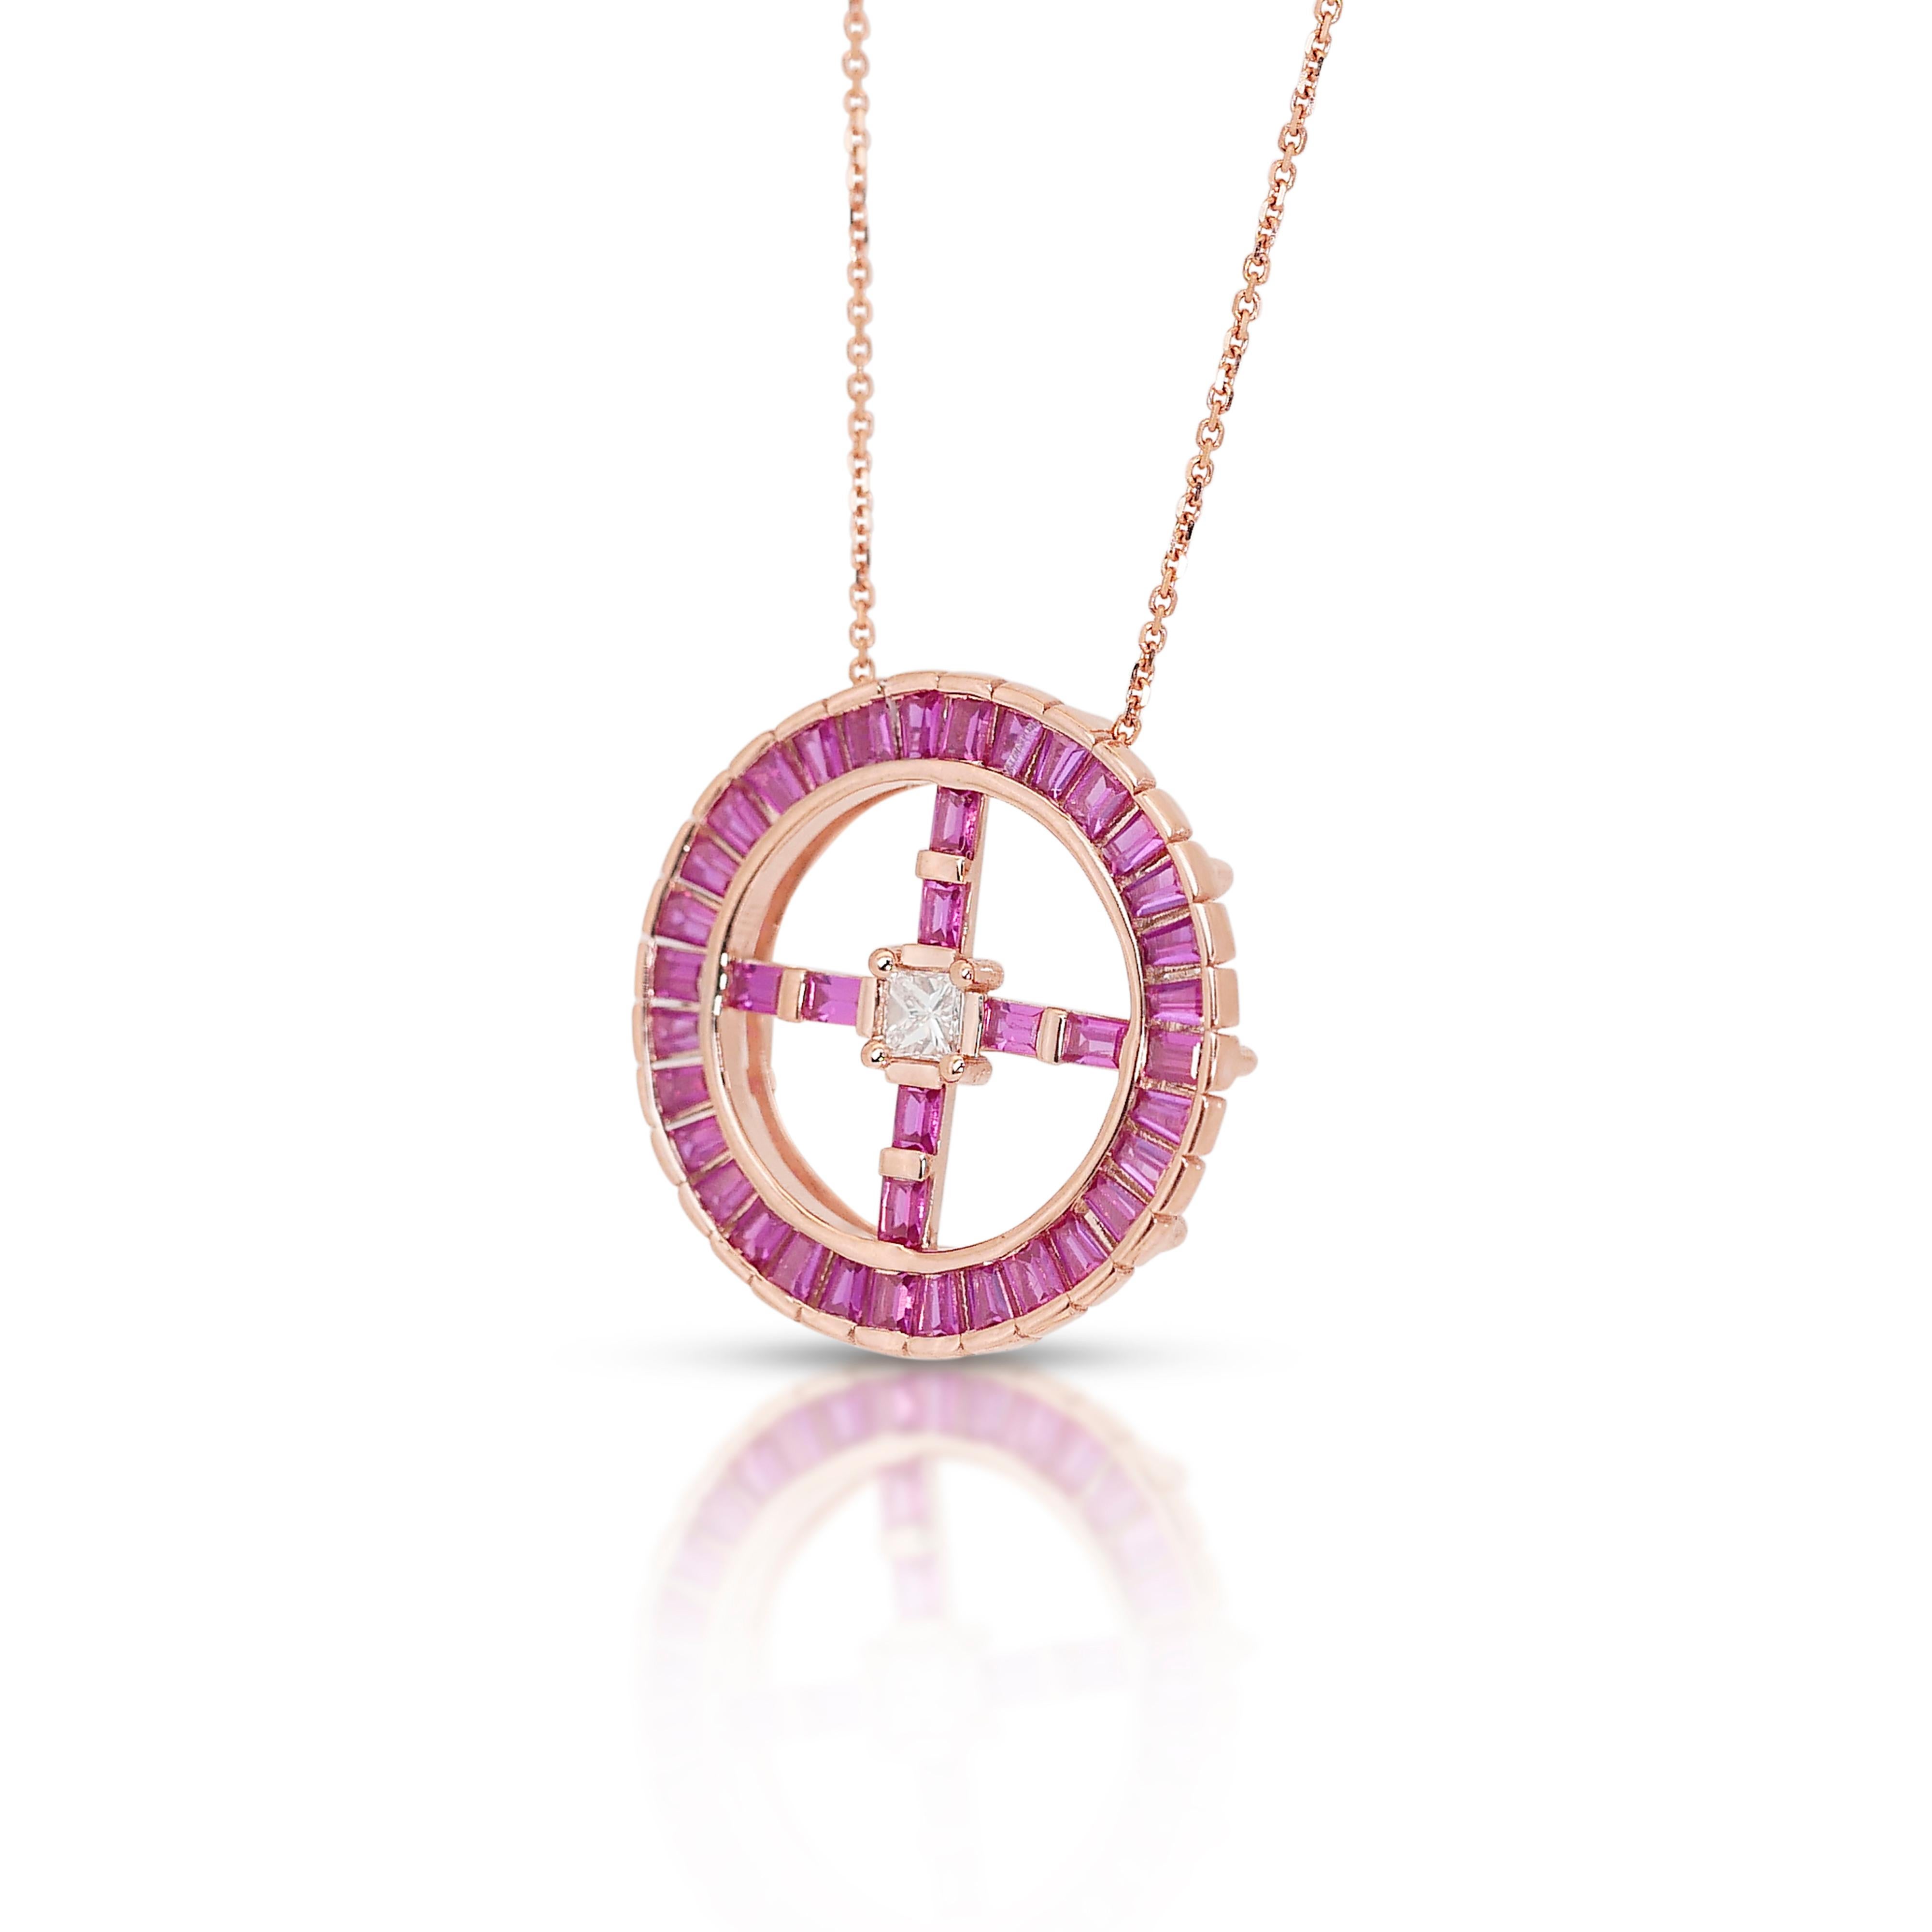 Dazzling 18K Rose Gold Diamond & Sapphire Necklace with 1.65 ct - AIG Certified For Sale 1